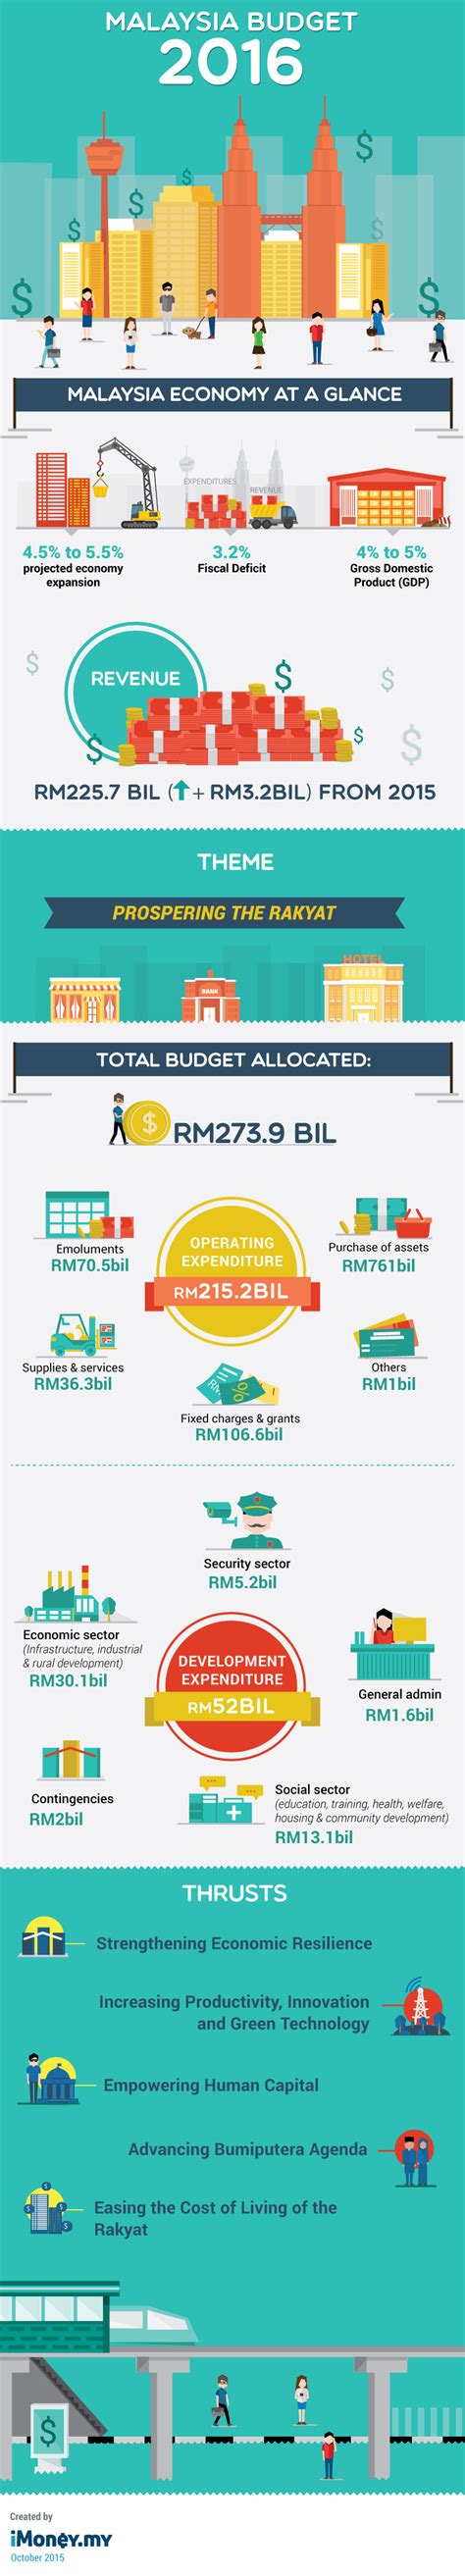 2016 malaysian budget highlights the 2016 budget proposals were announced by the prime minister, dato seri najib razak on 23rd october the 2016 budget sets the framework for the 11th malaysia development. Malaysia Budget 2016: The Key Highlights [Infographic ...